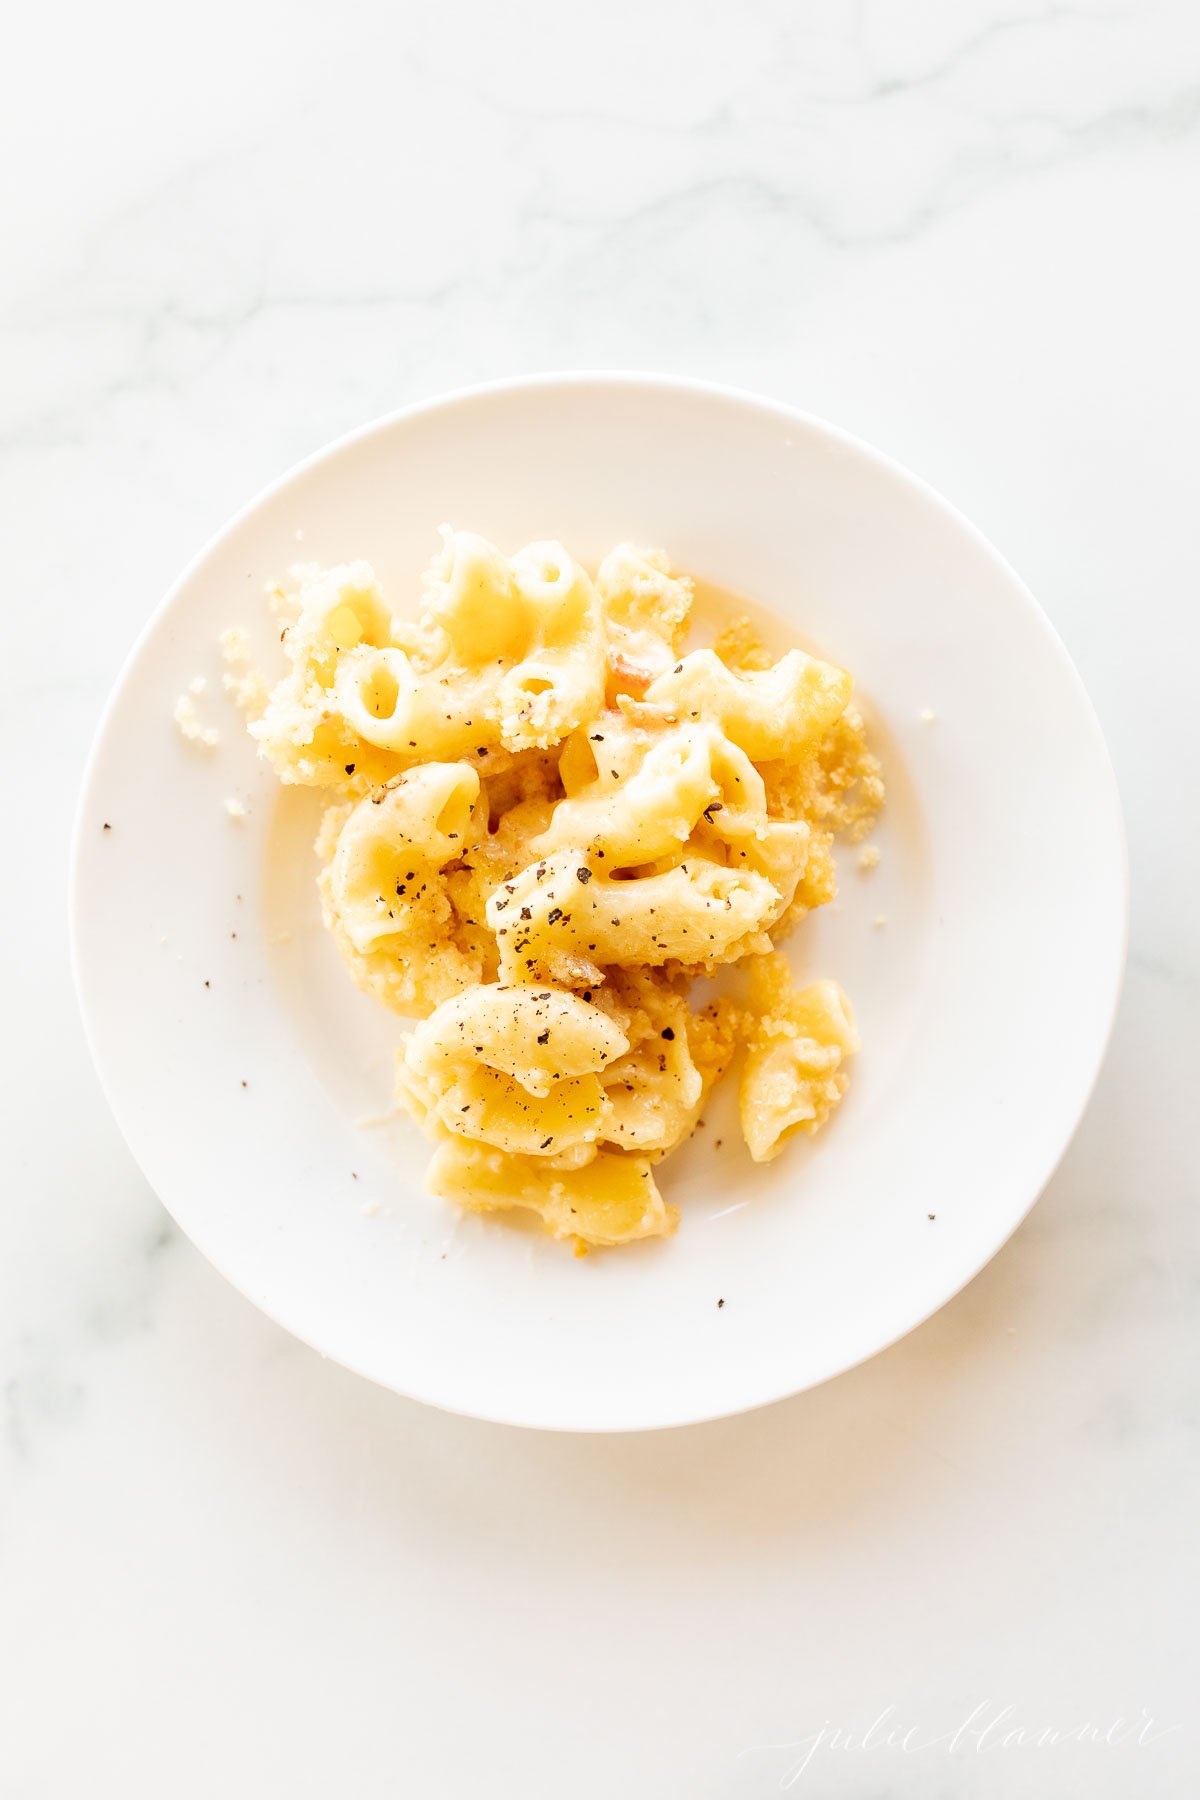 Delicious macaroni and cheese on a white plate, made using a baked mac and cheese recipe.